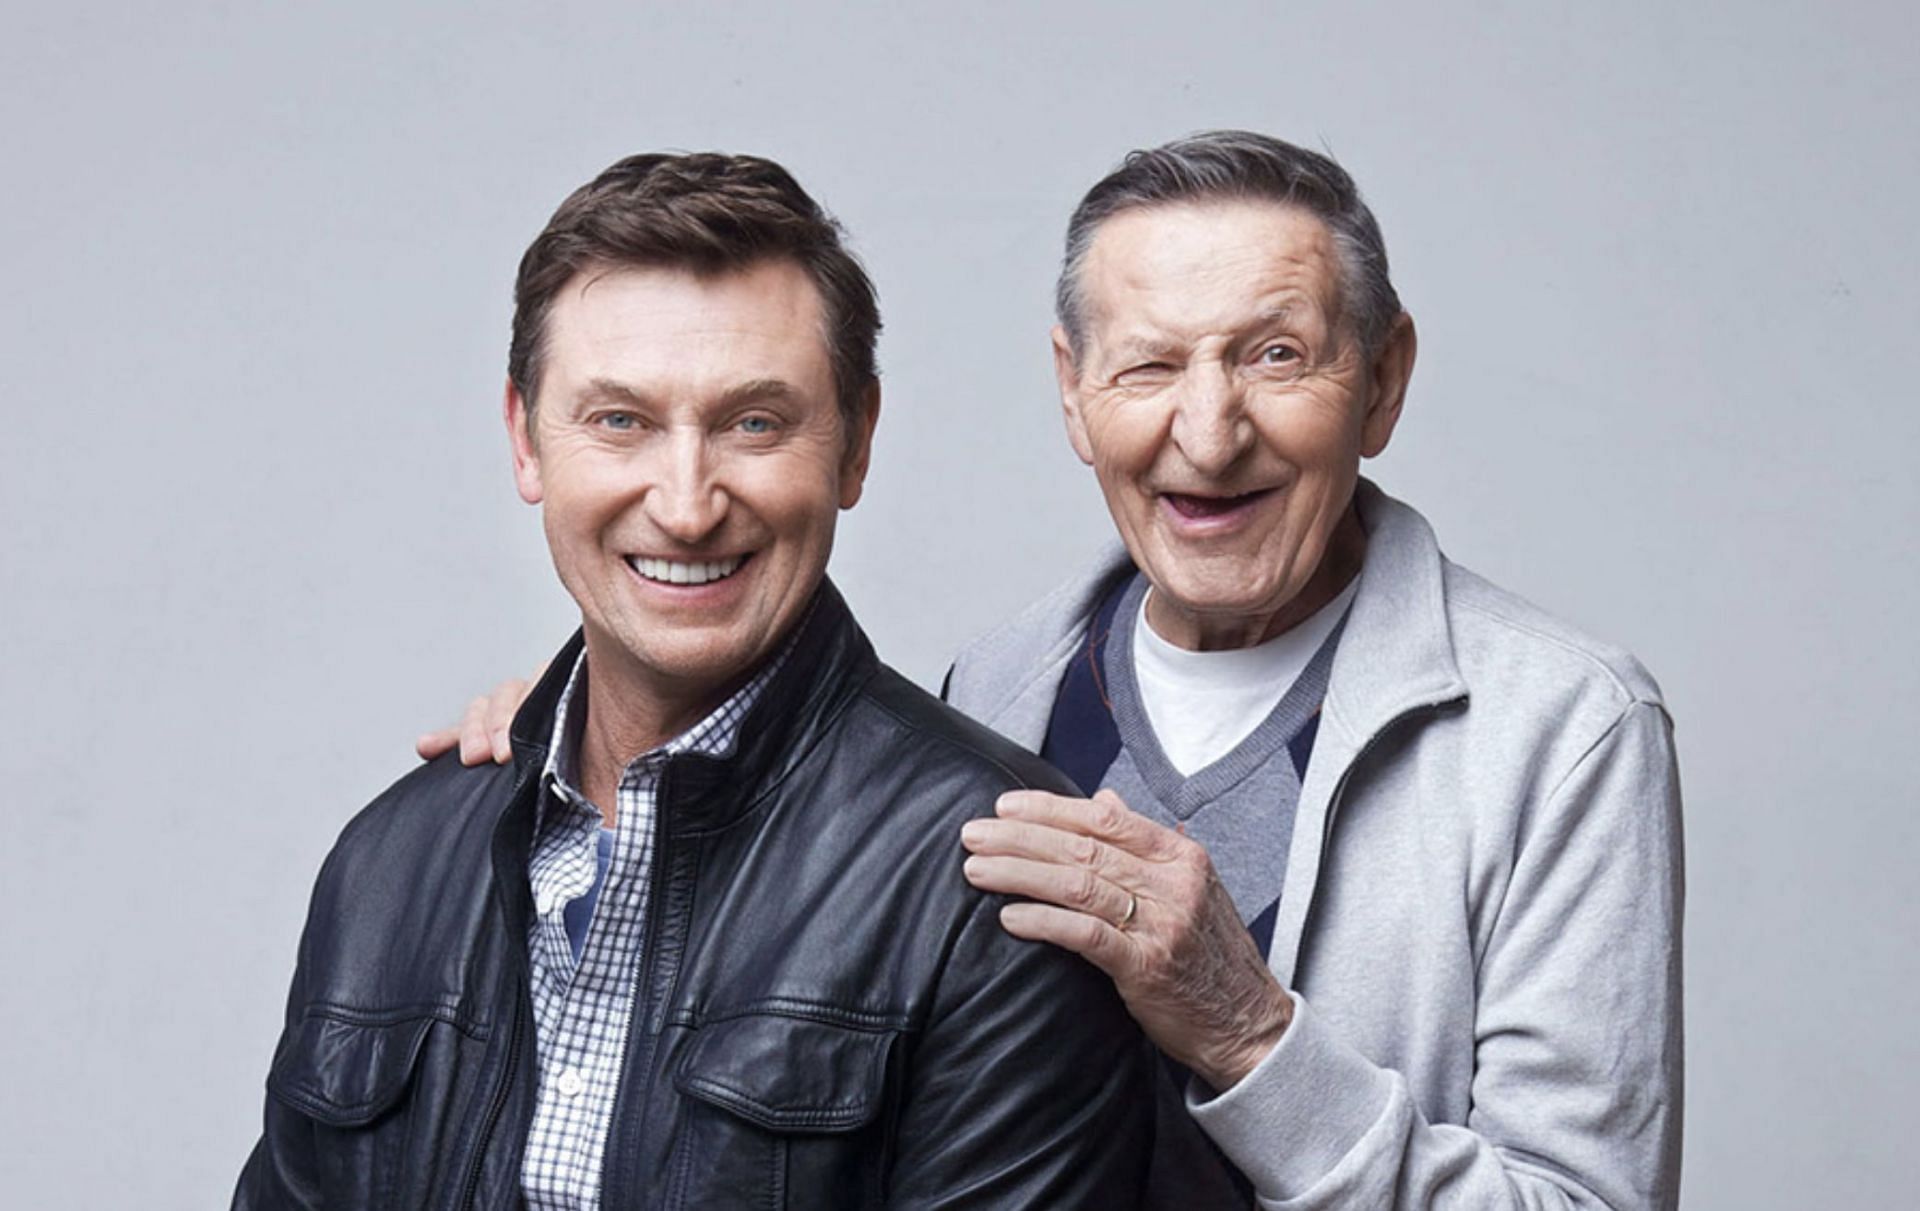 Who was Walter Gretzky? Meet The Great One